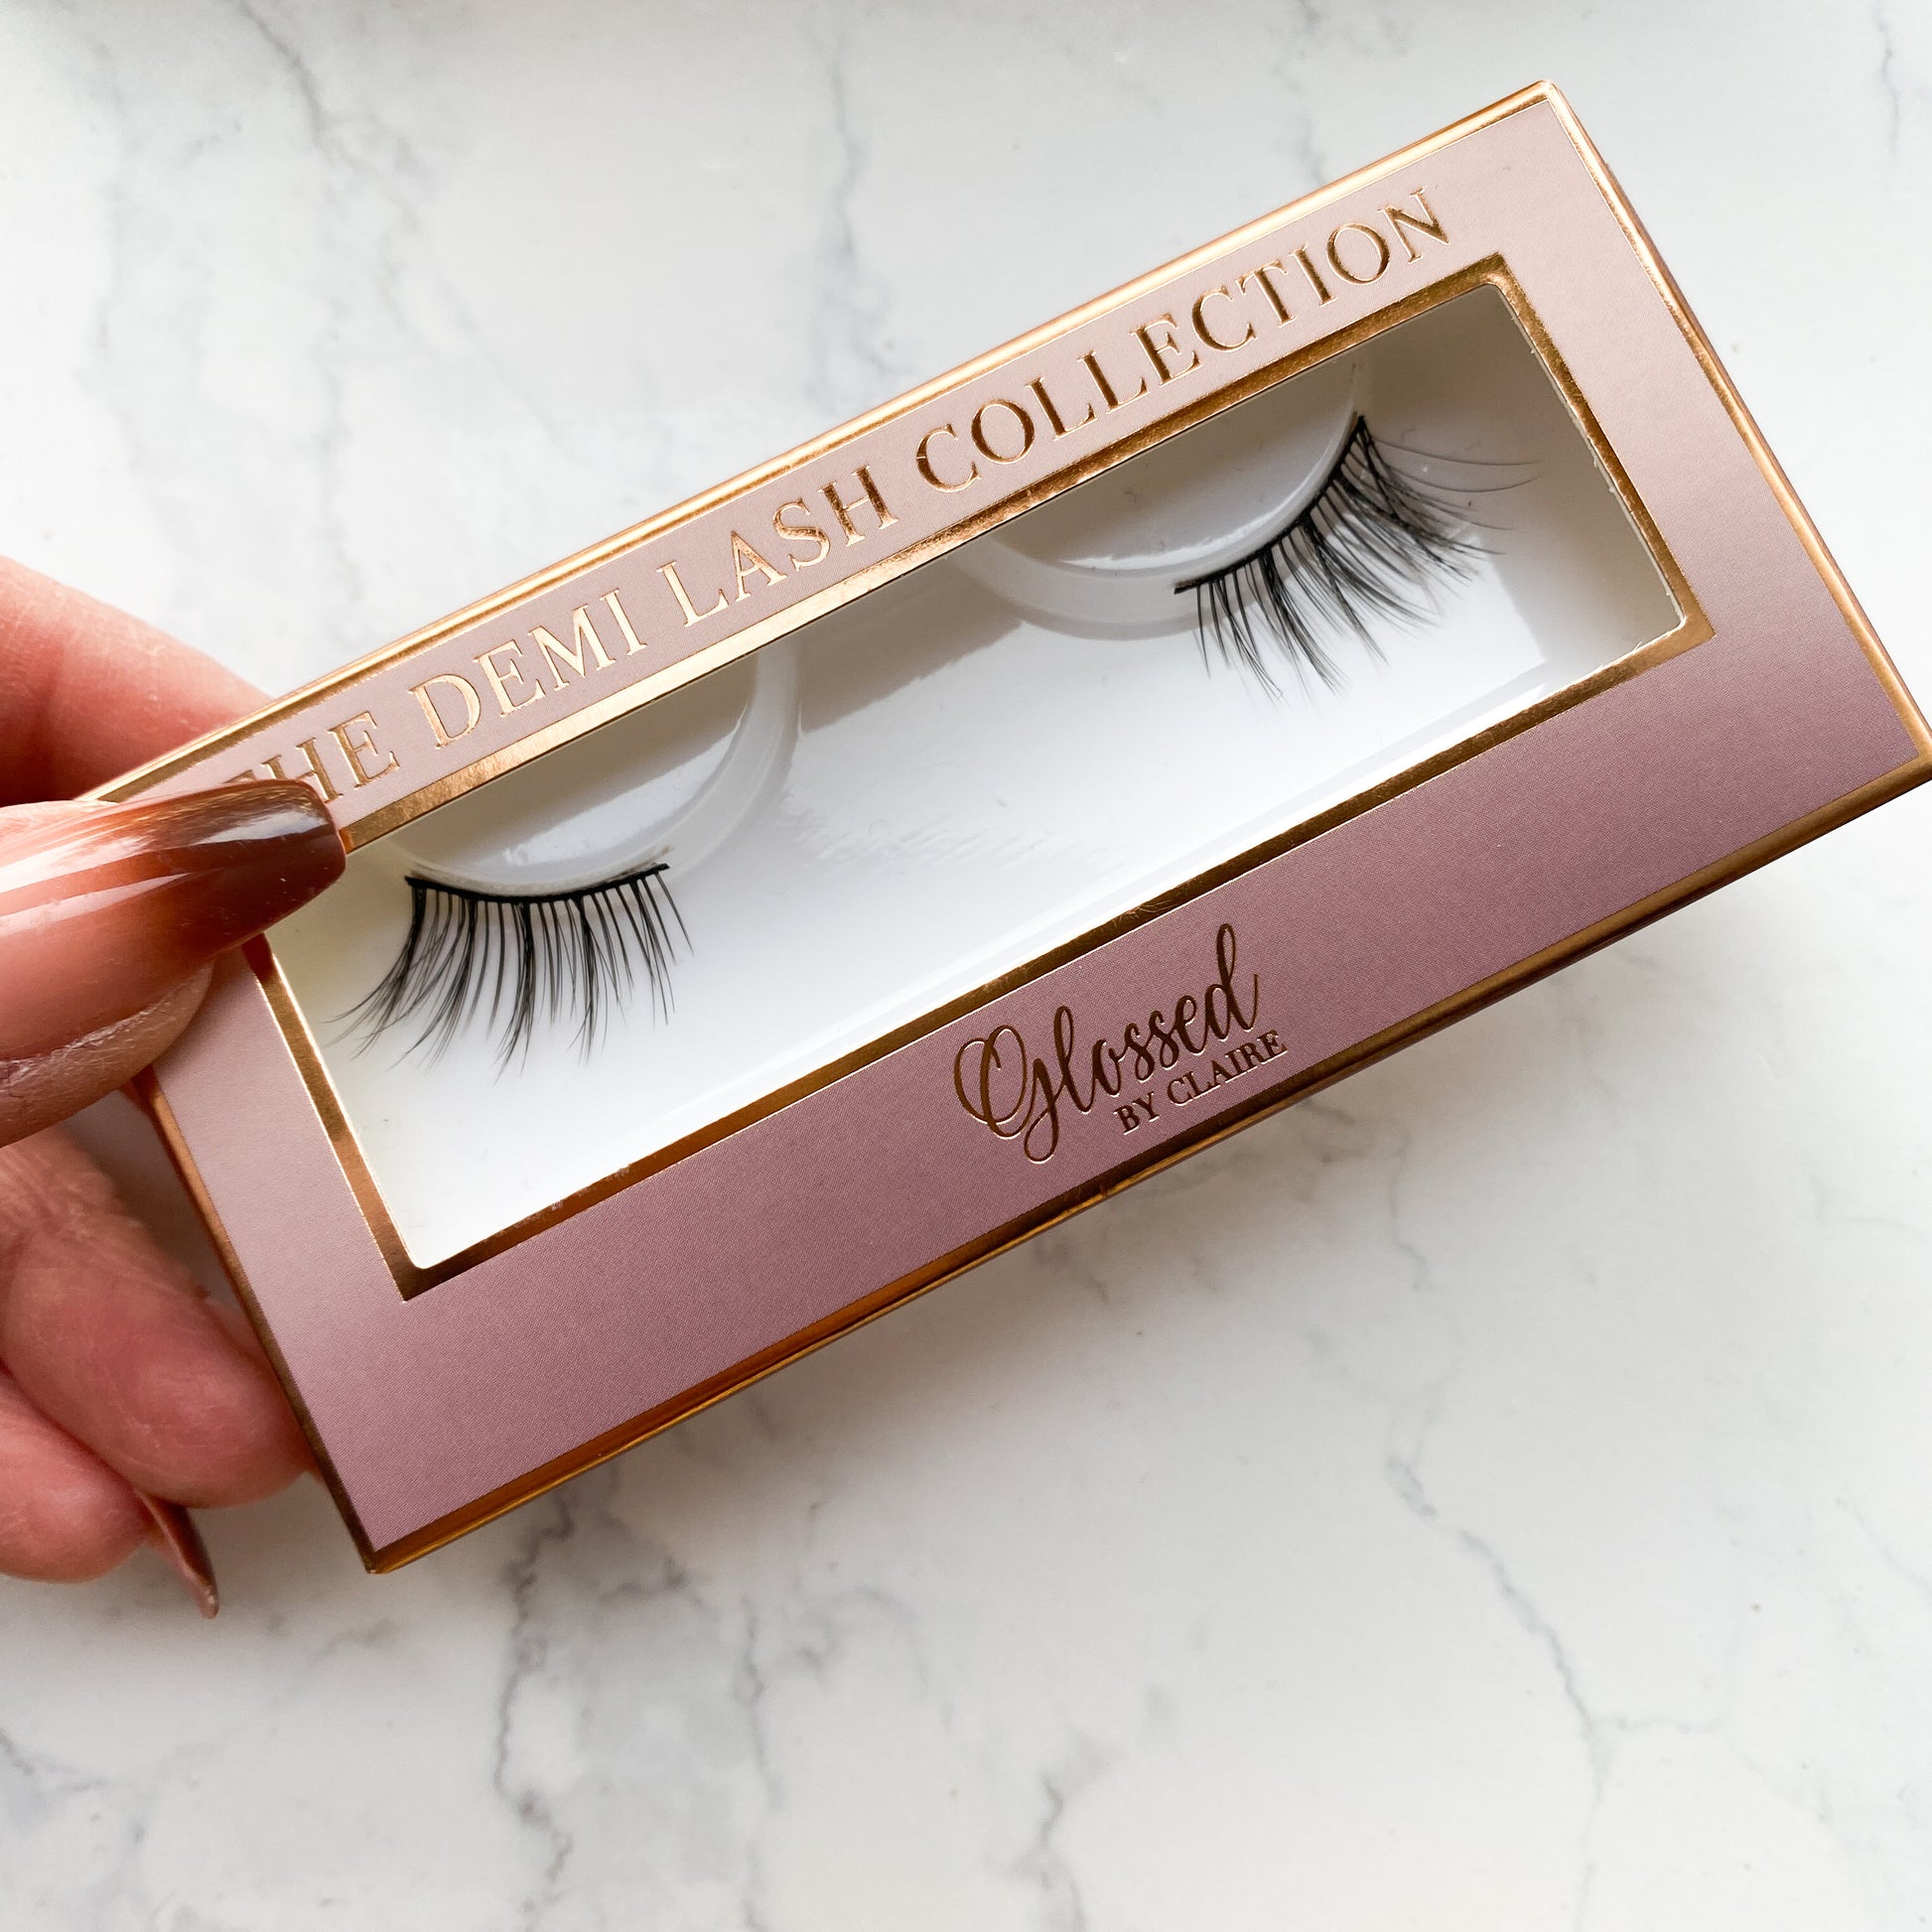 DL5 Half Lash Glossed By Claire in packaging box